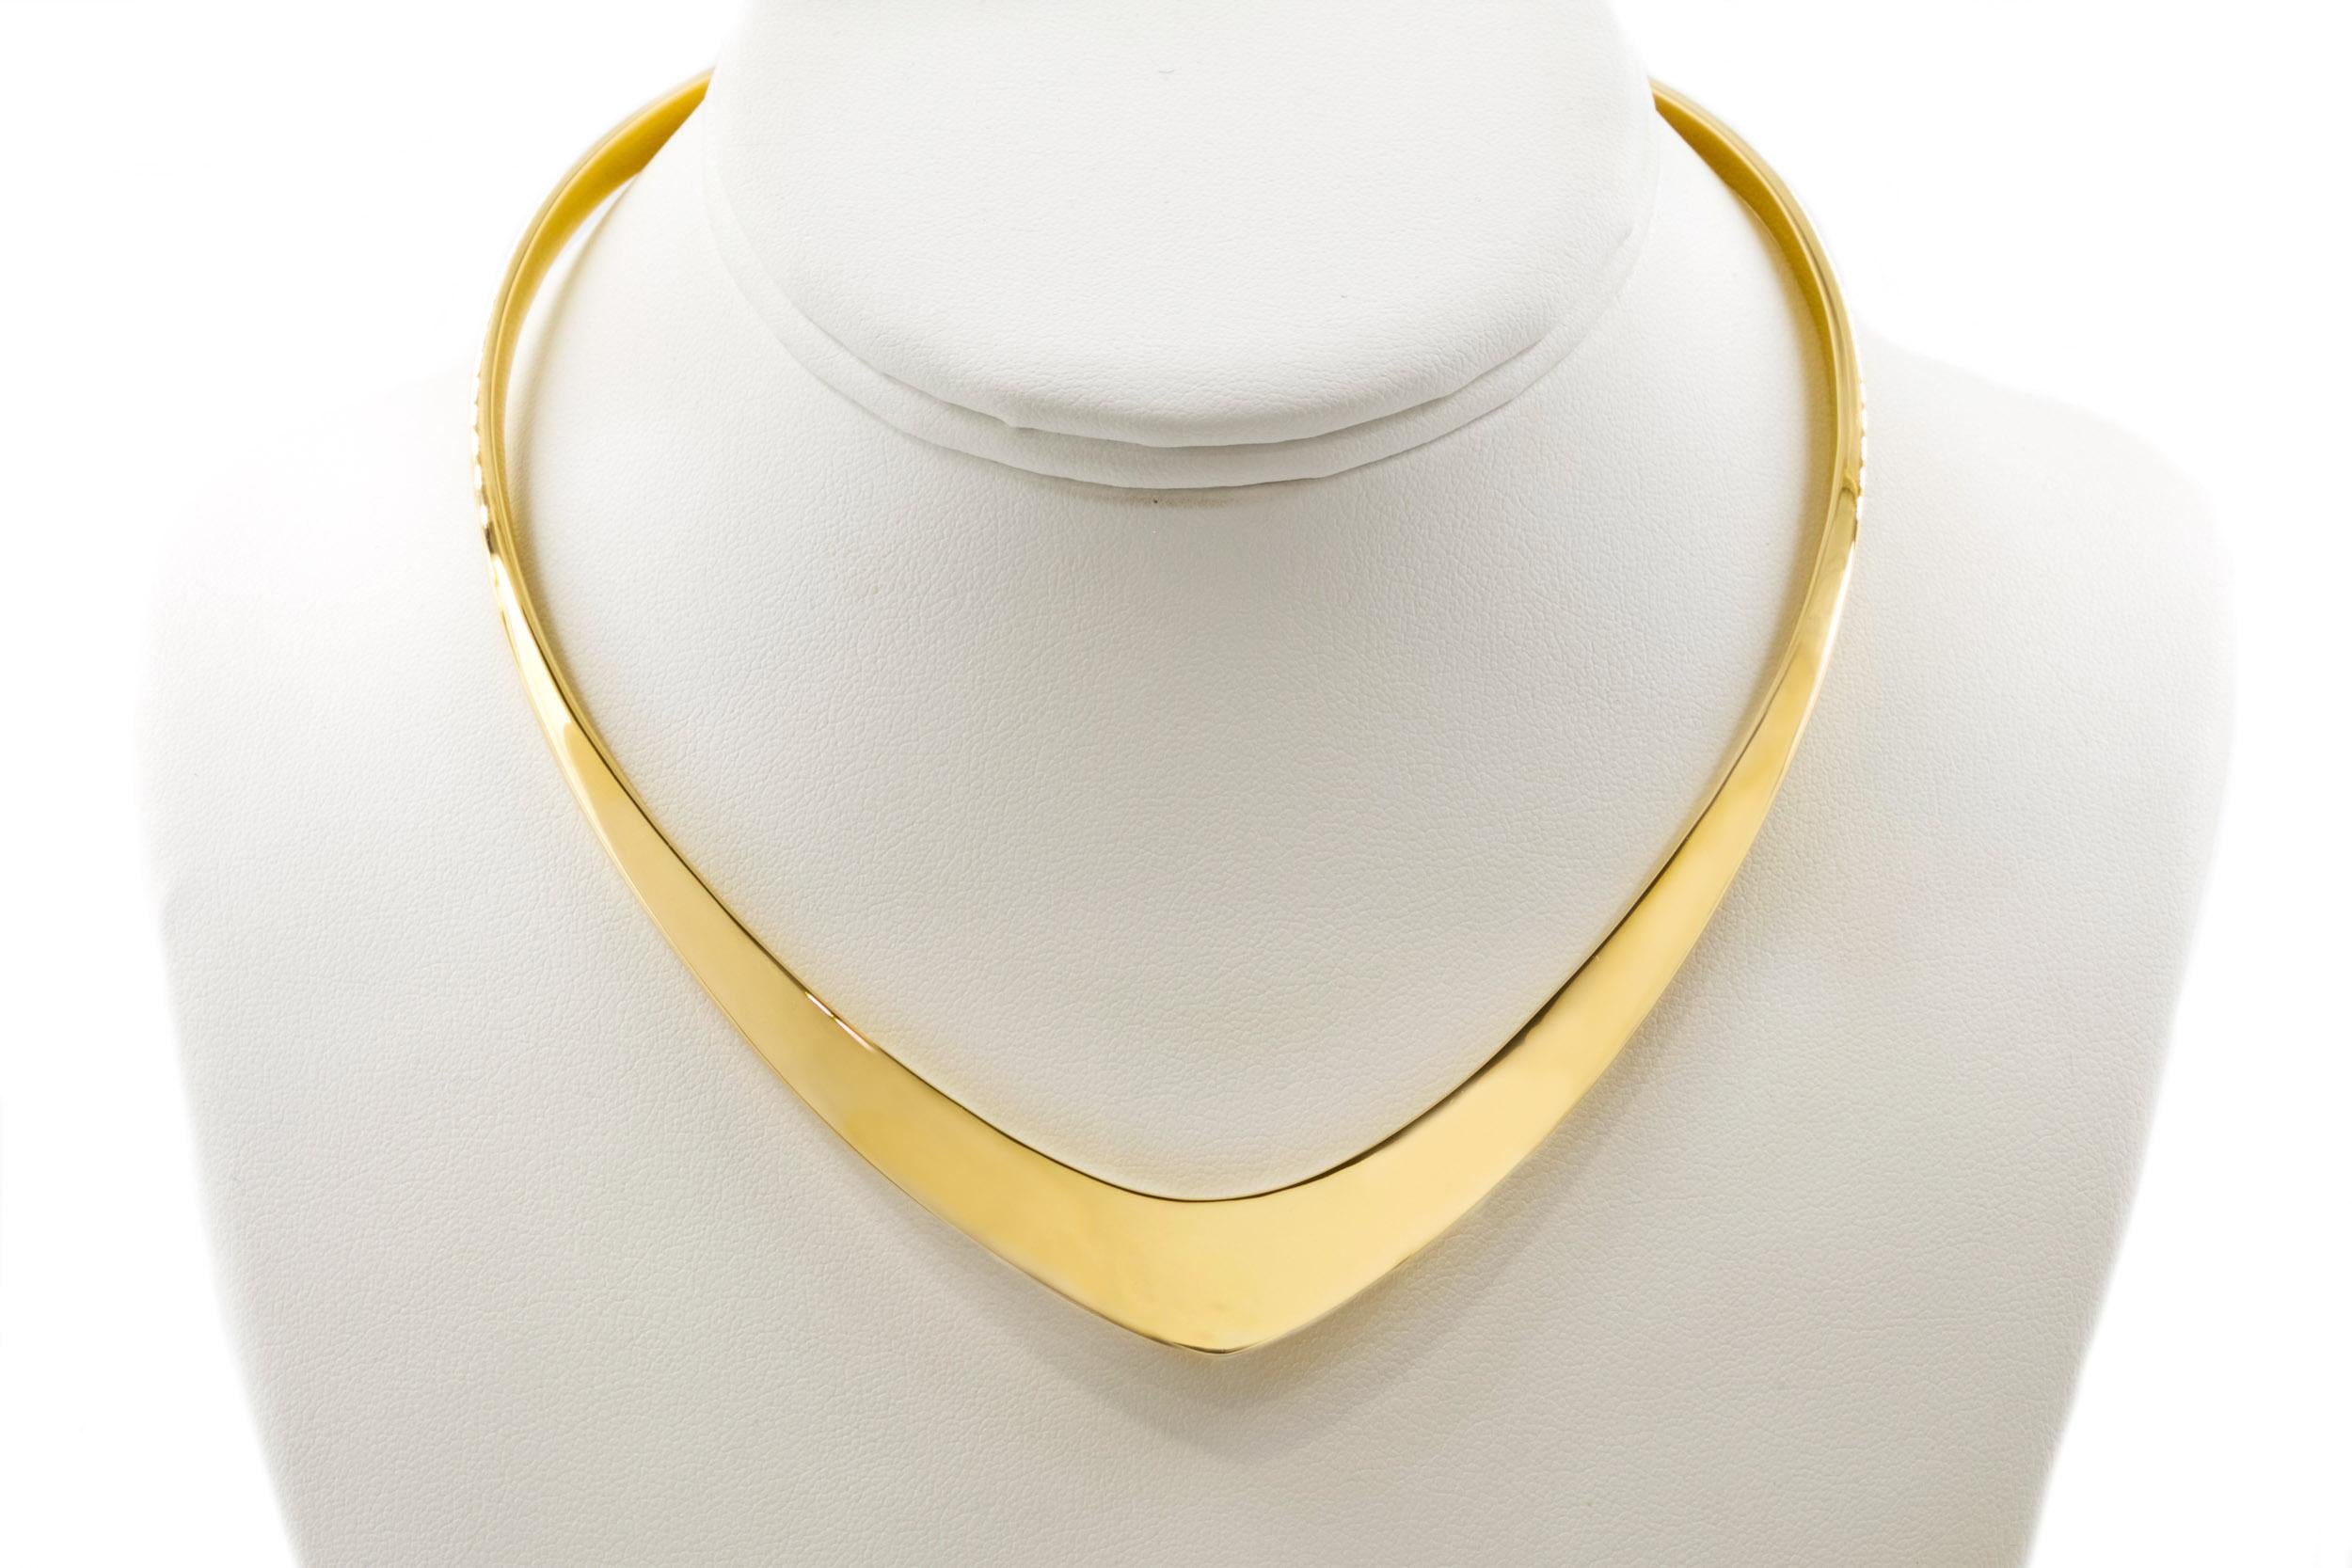 An exquisite design by the renowned goldsmith Ronald Hayes Pearson, this fine collar is hand wrought from solid 14 karat yellow gold creating an very attractive overall profile with a body that twists from squared ends into a flattened angular tip.